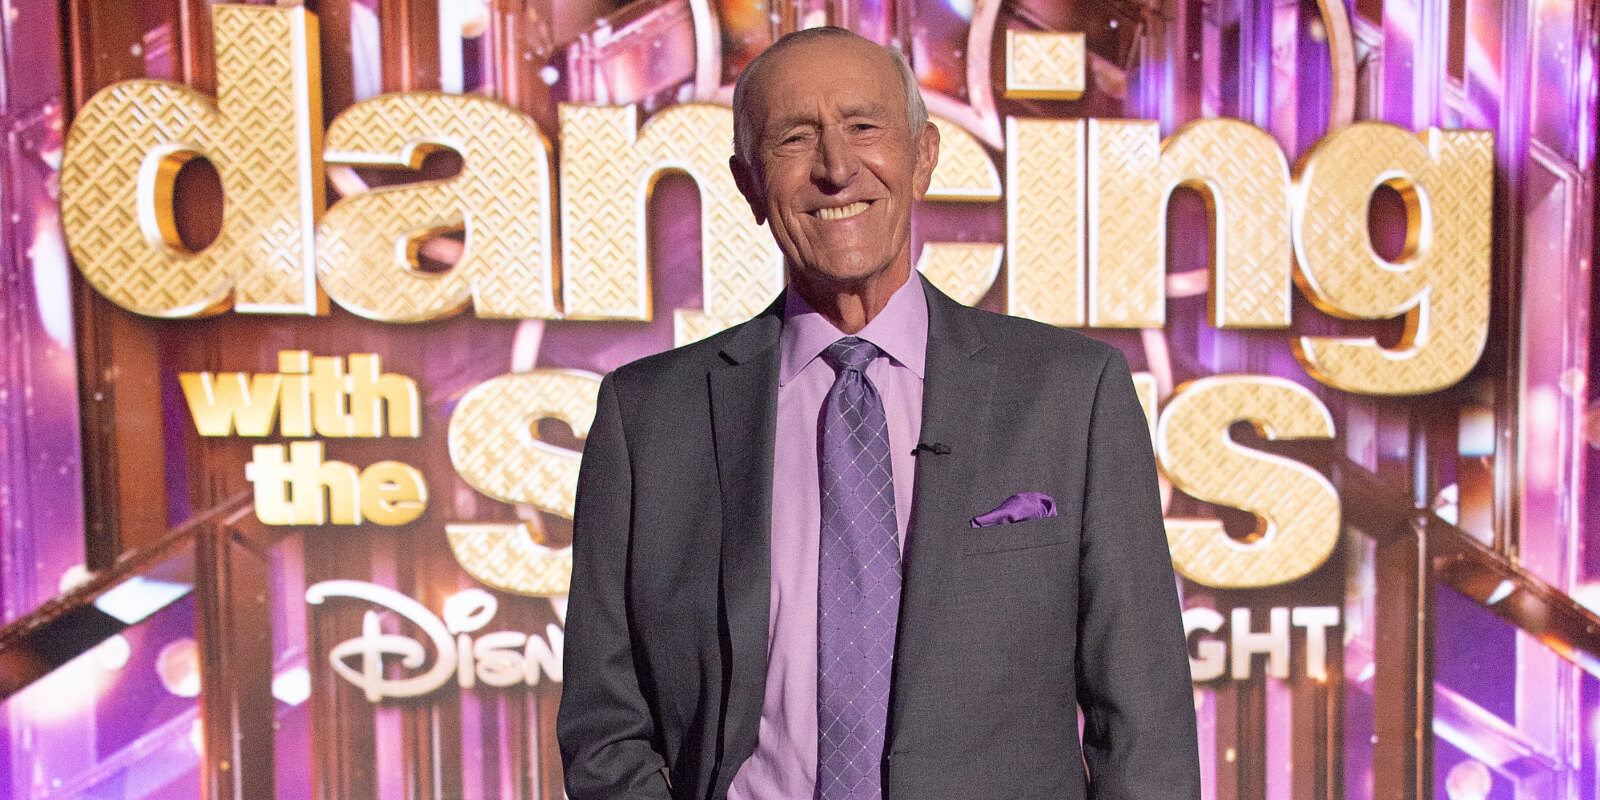 'Dancing with the Stars' Len Goodman has died at age 78.